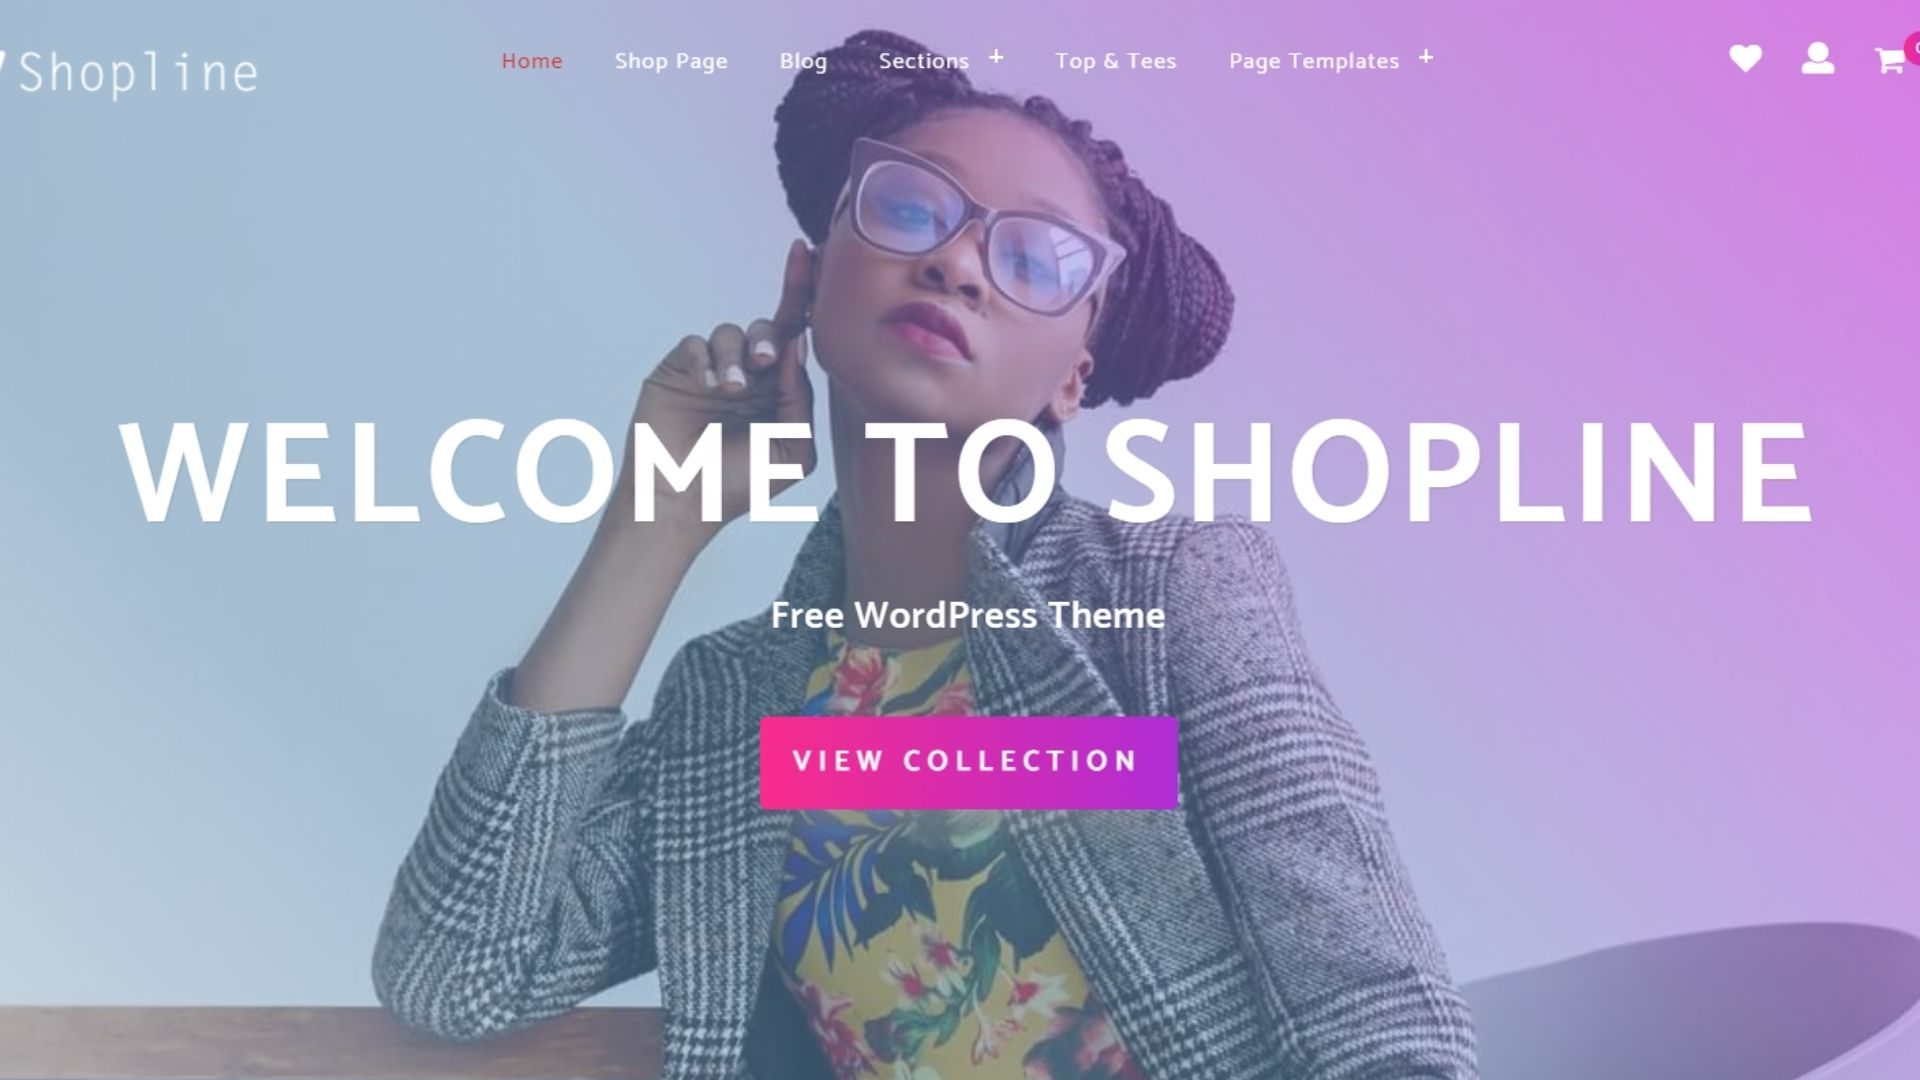 Shopline Theme And Website Template Free Download By Daulat Hussain